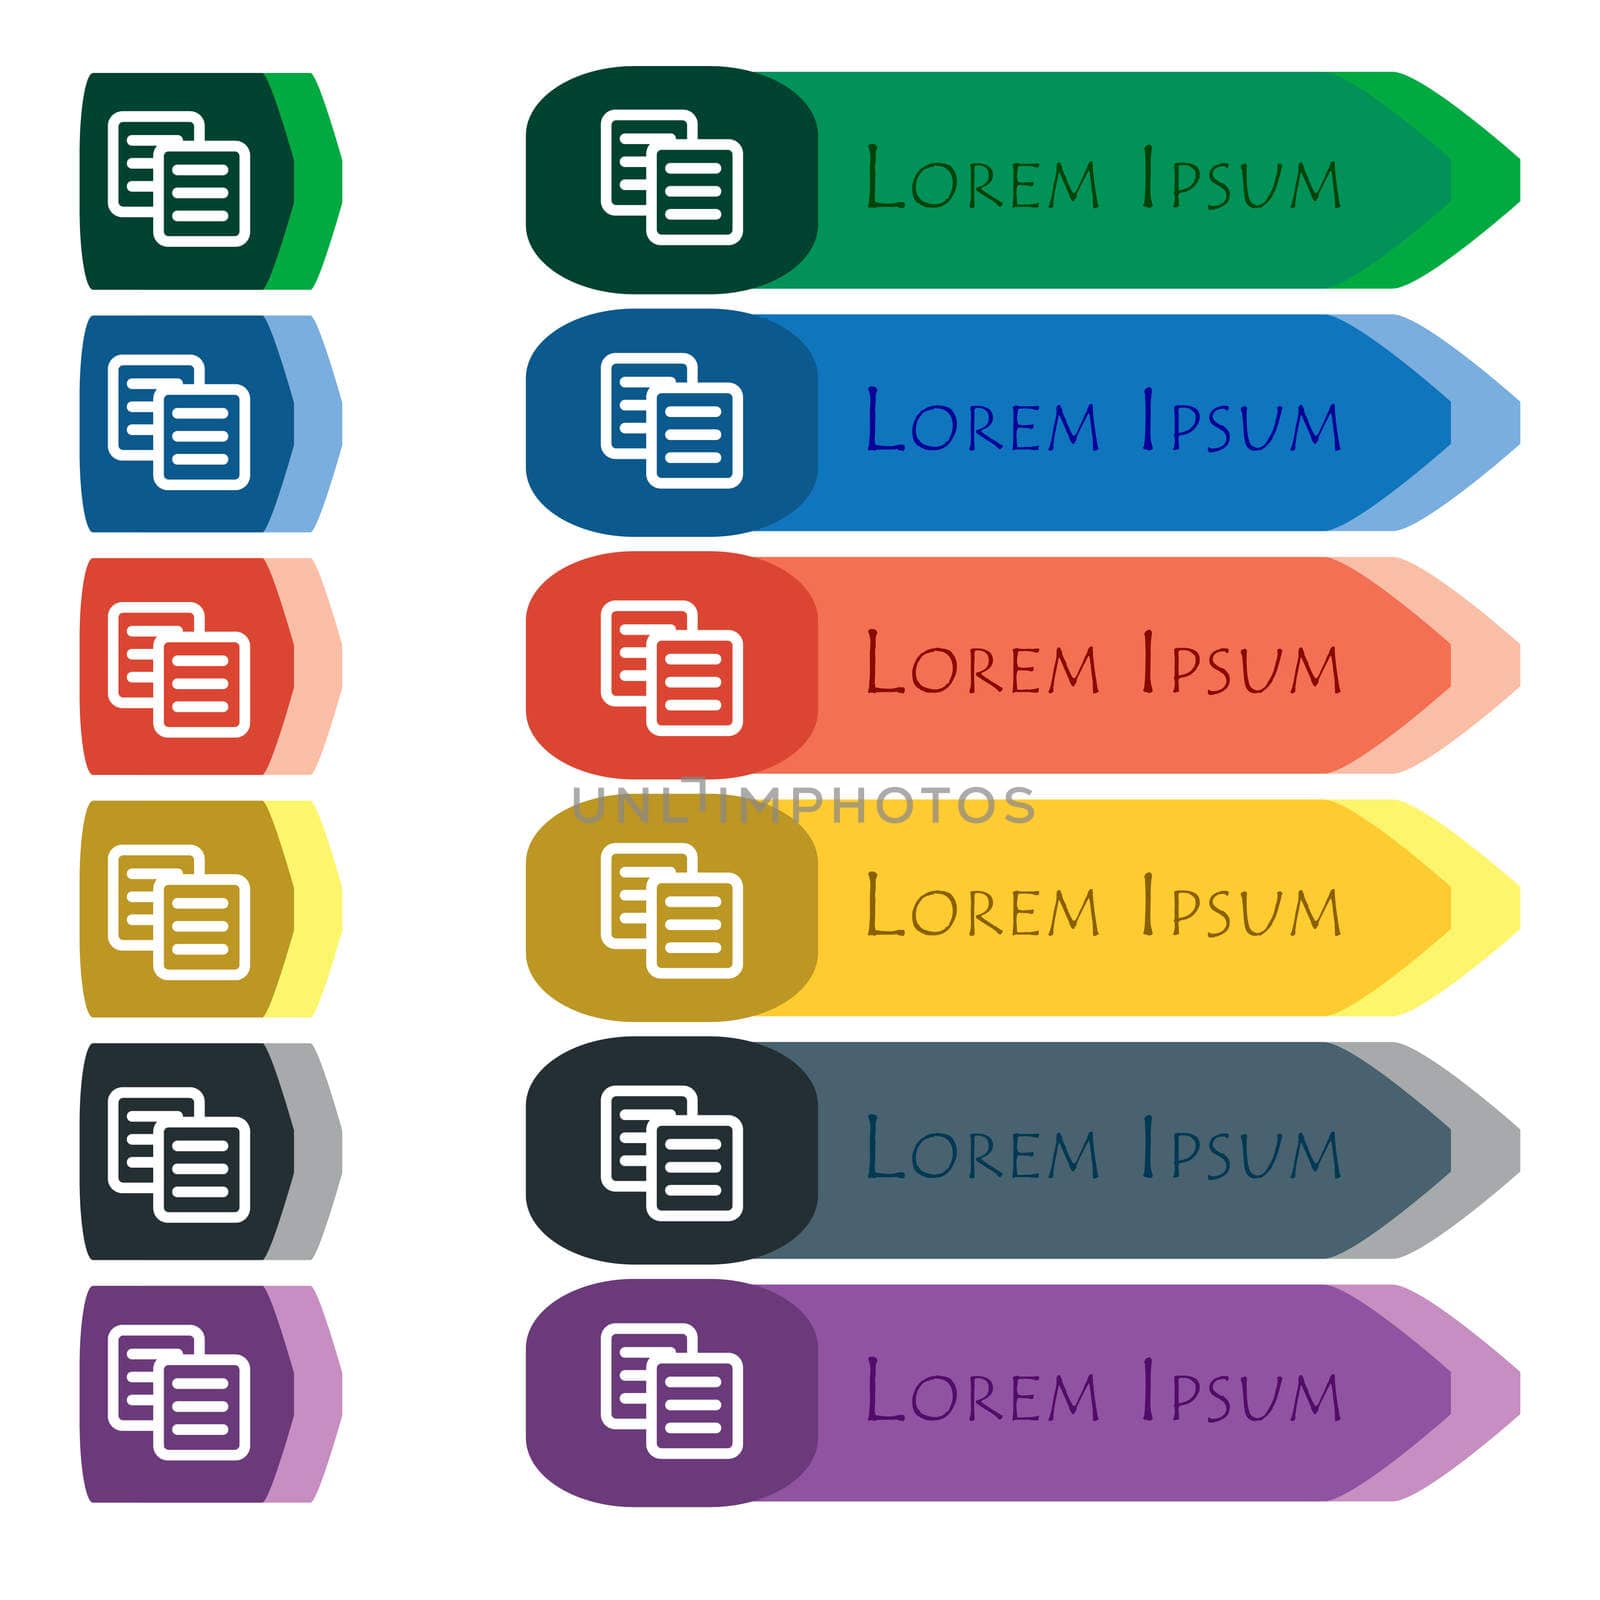 copy icon sign. Set of colorful, bright long buttons with additional small modules. Flat design. 